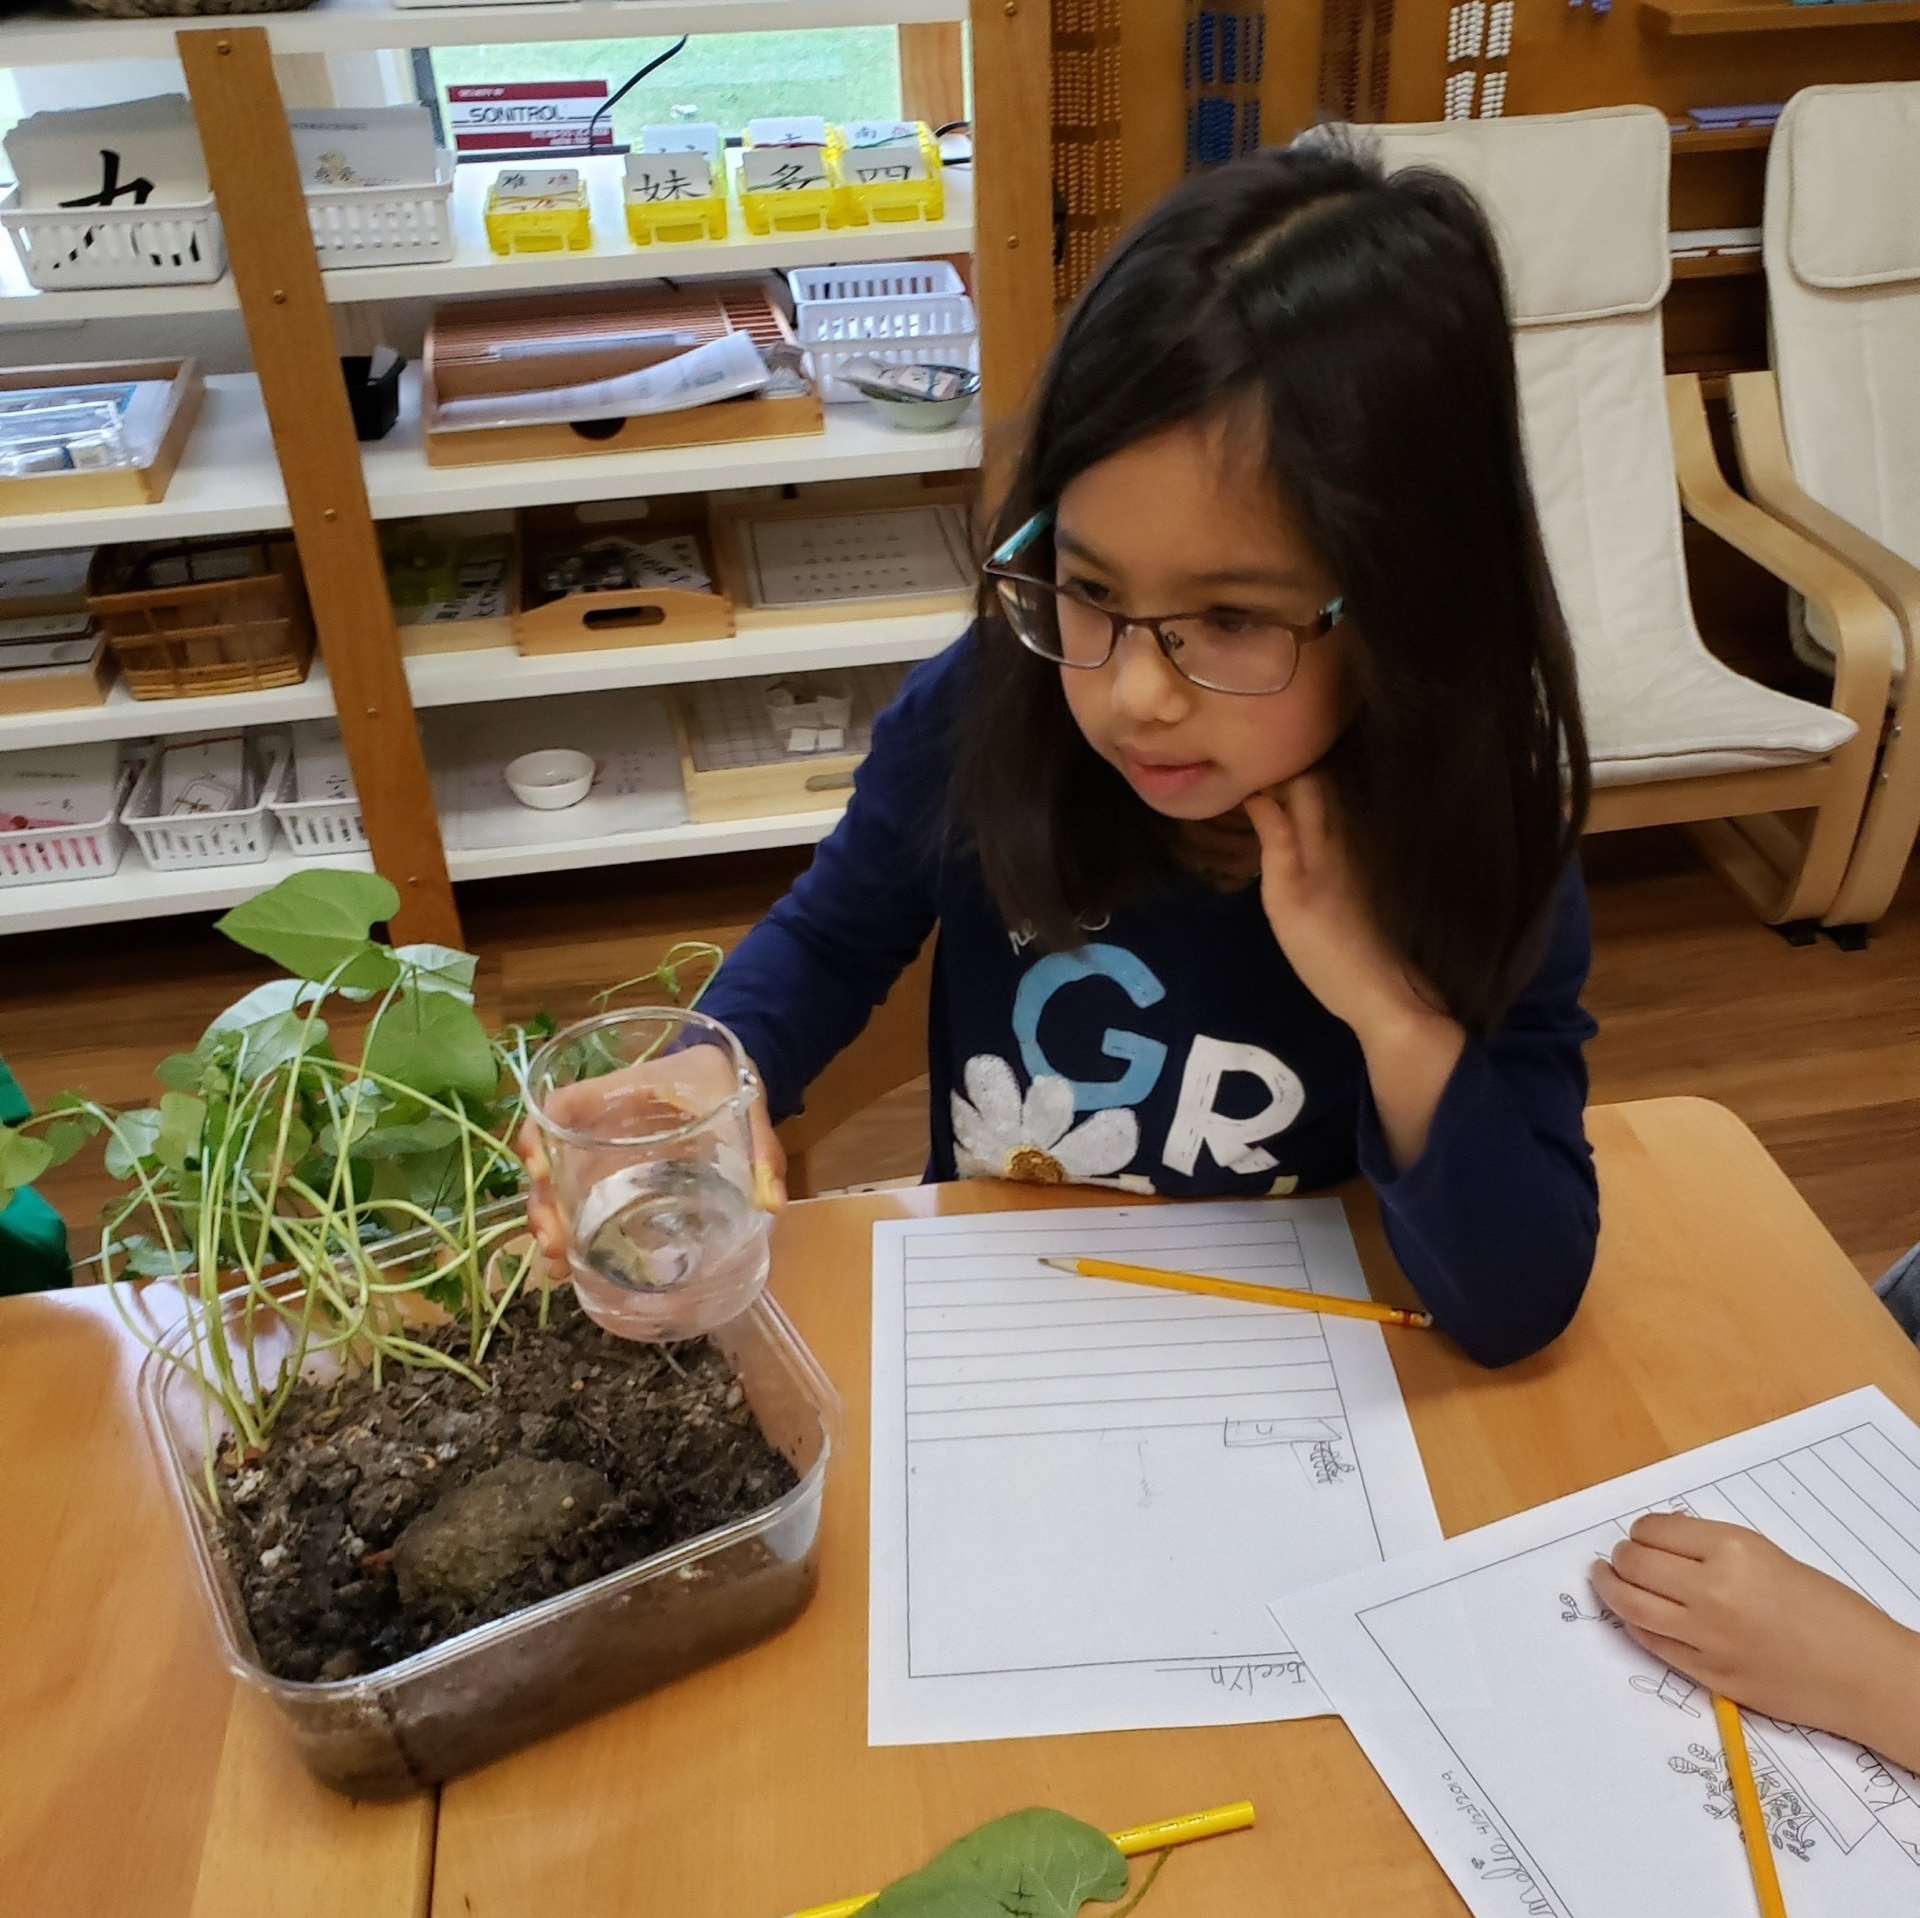 Child working with plants